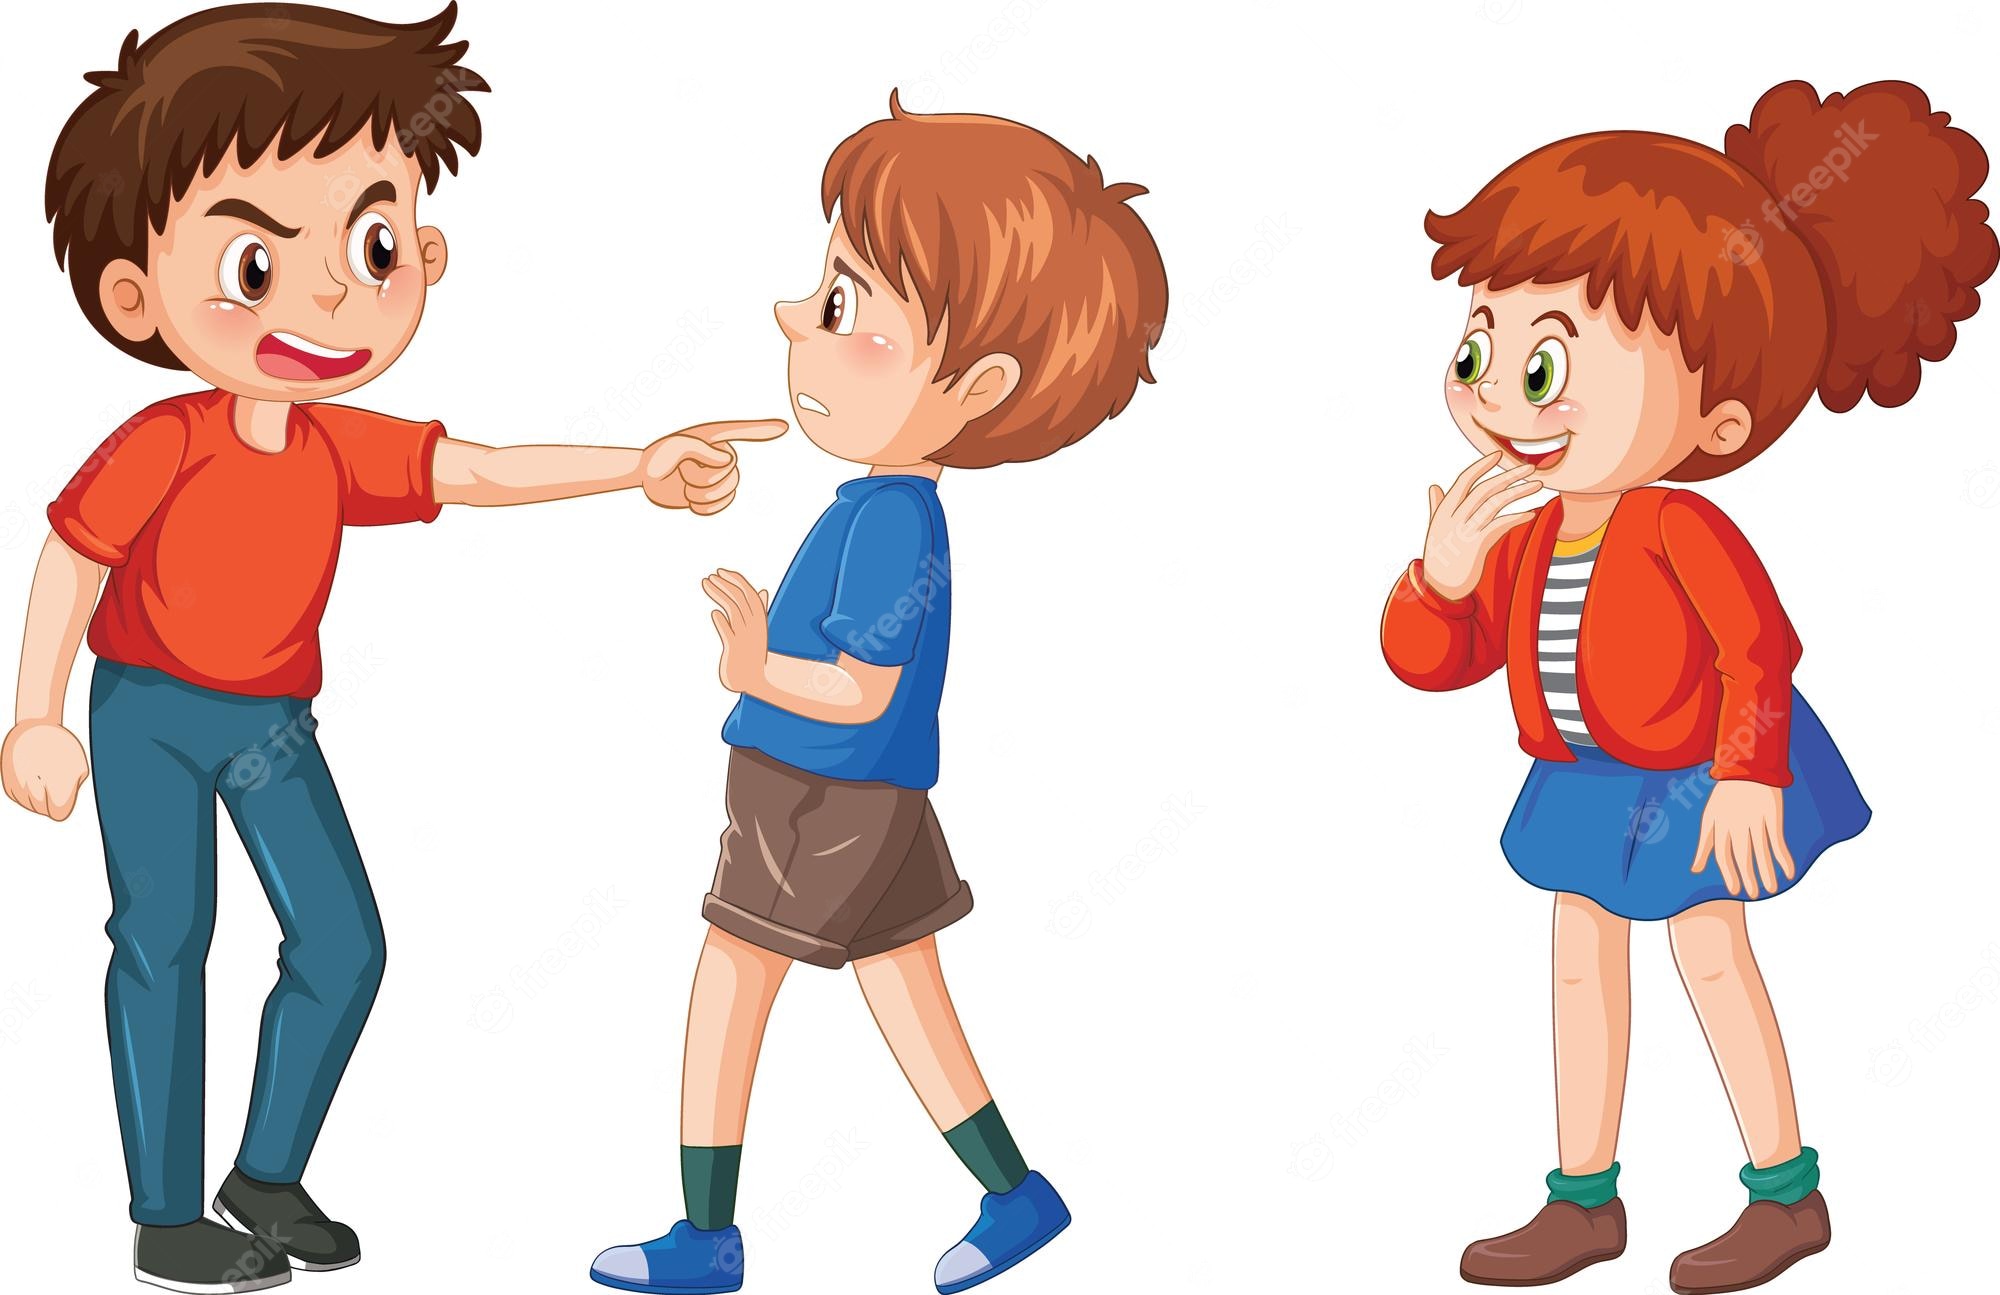 470+ Clip Art Of A Two People Fighting Illustrations, Royalty-Free ...